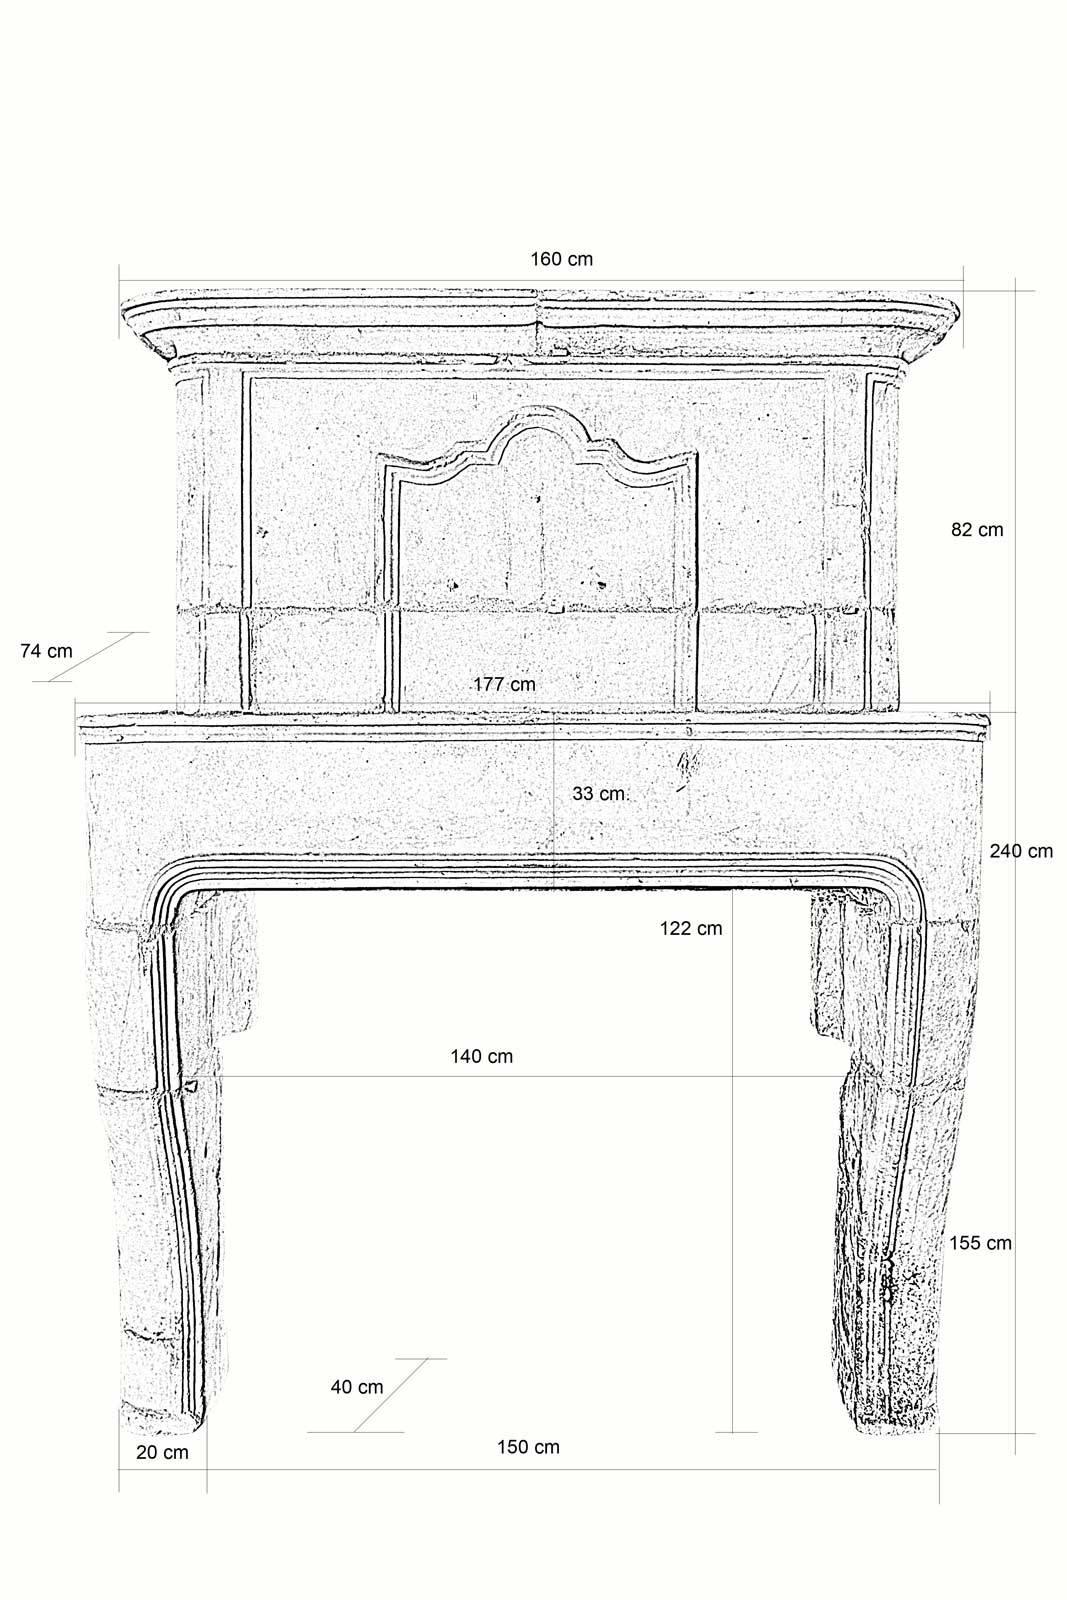 Dating from the early 18th century, Louis XIV stone overmantel fireplace decorated with a molded frame. The monolith lintel rests on a console jamb. The focal line is emphasized by a torus and cornice has slight setback.